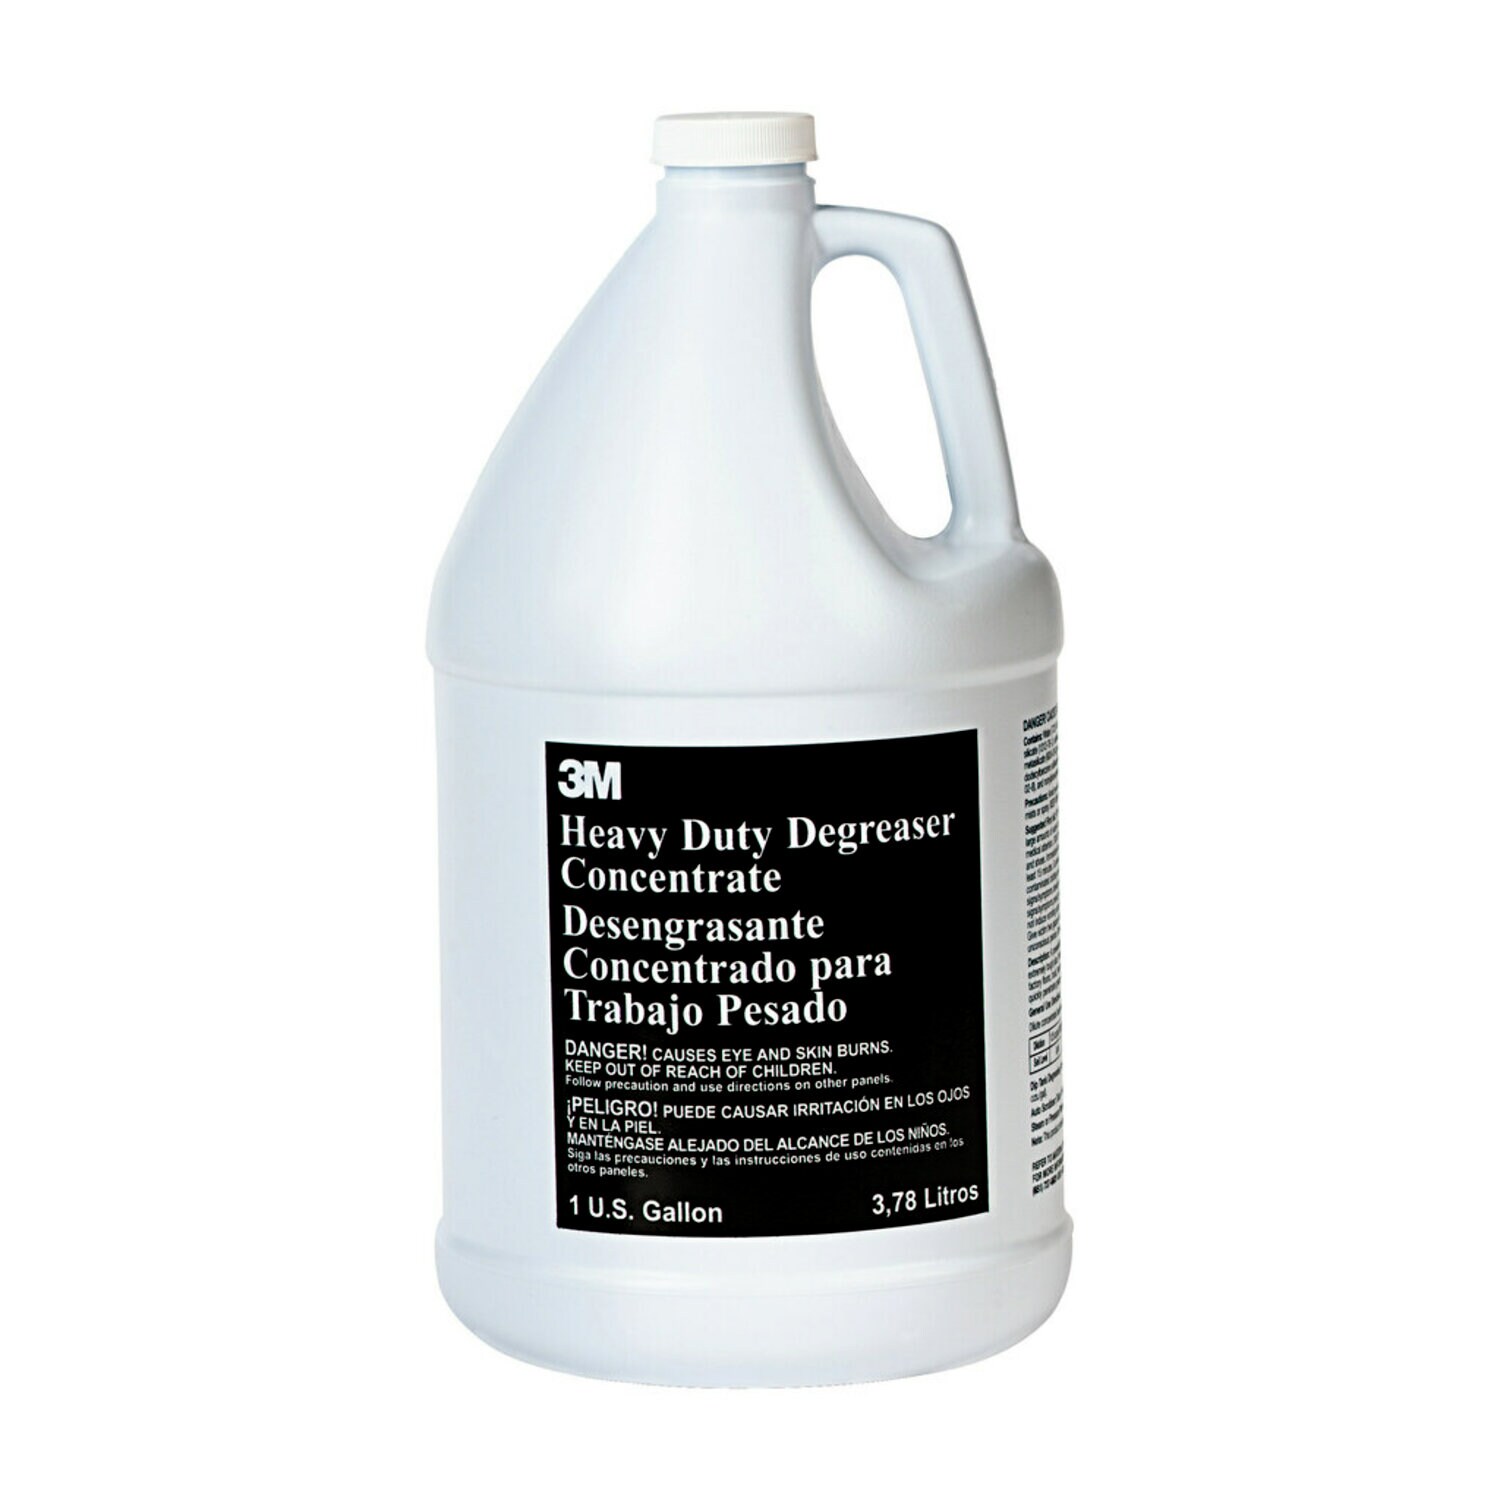 Simple Green Cleaner/Degreaser Concentrate - Liquid 5 gal Pail - 00001